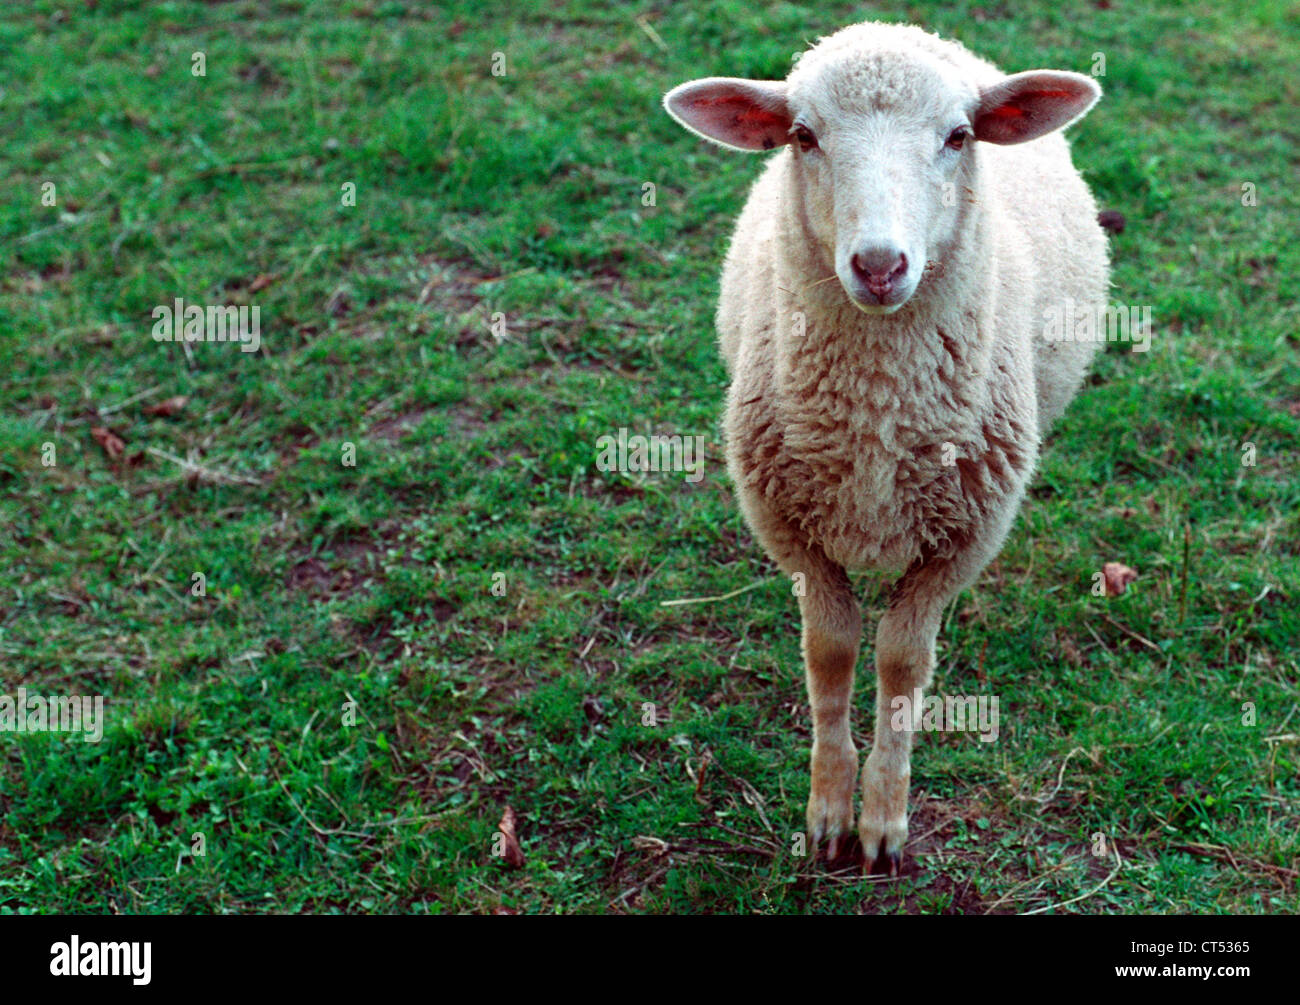 Colno, a young sheep on the pasture Stock Photo